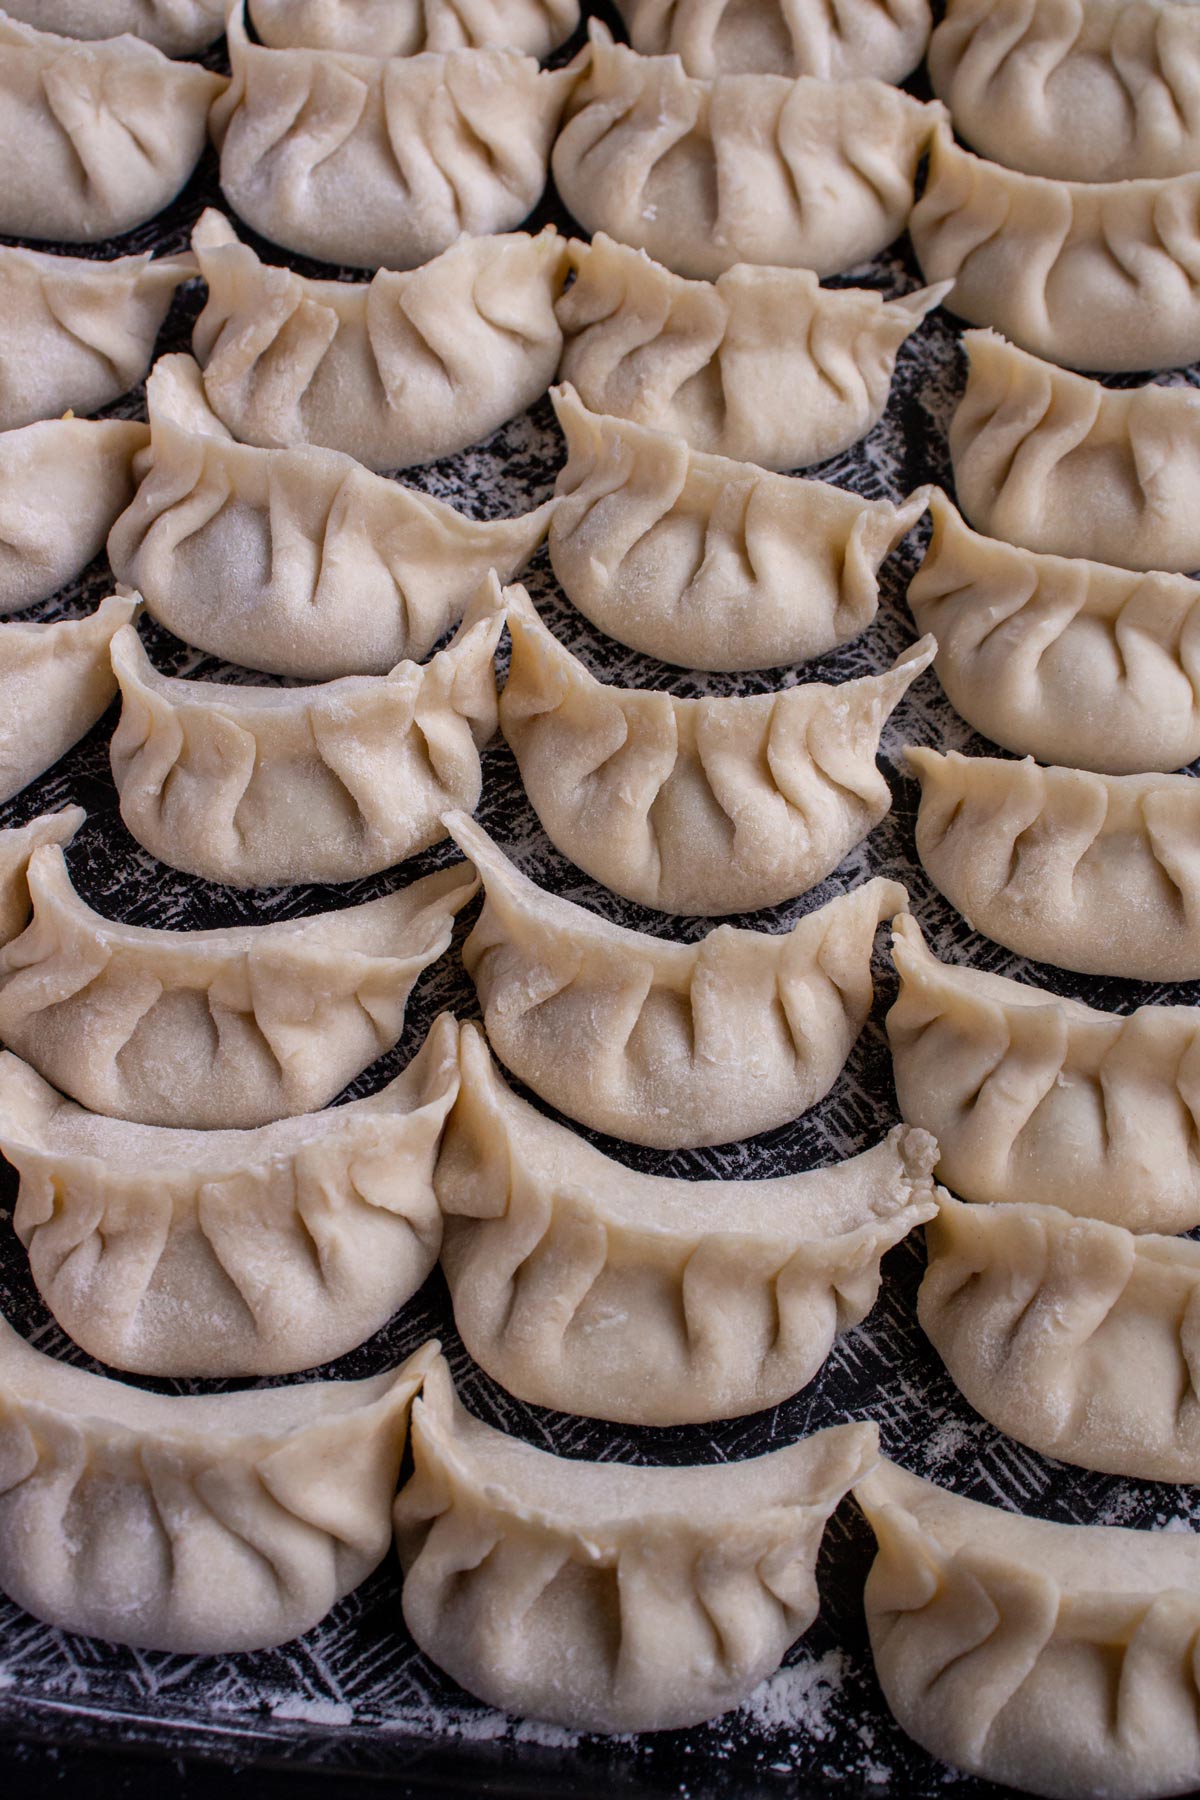 Four rows of assembled but uncooked Chinese dumplings with pleated edges on a black surface.